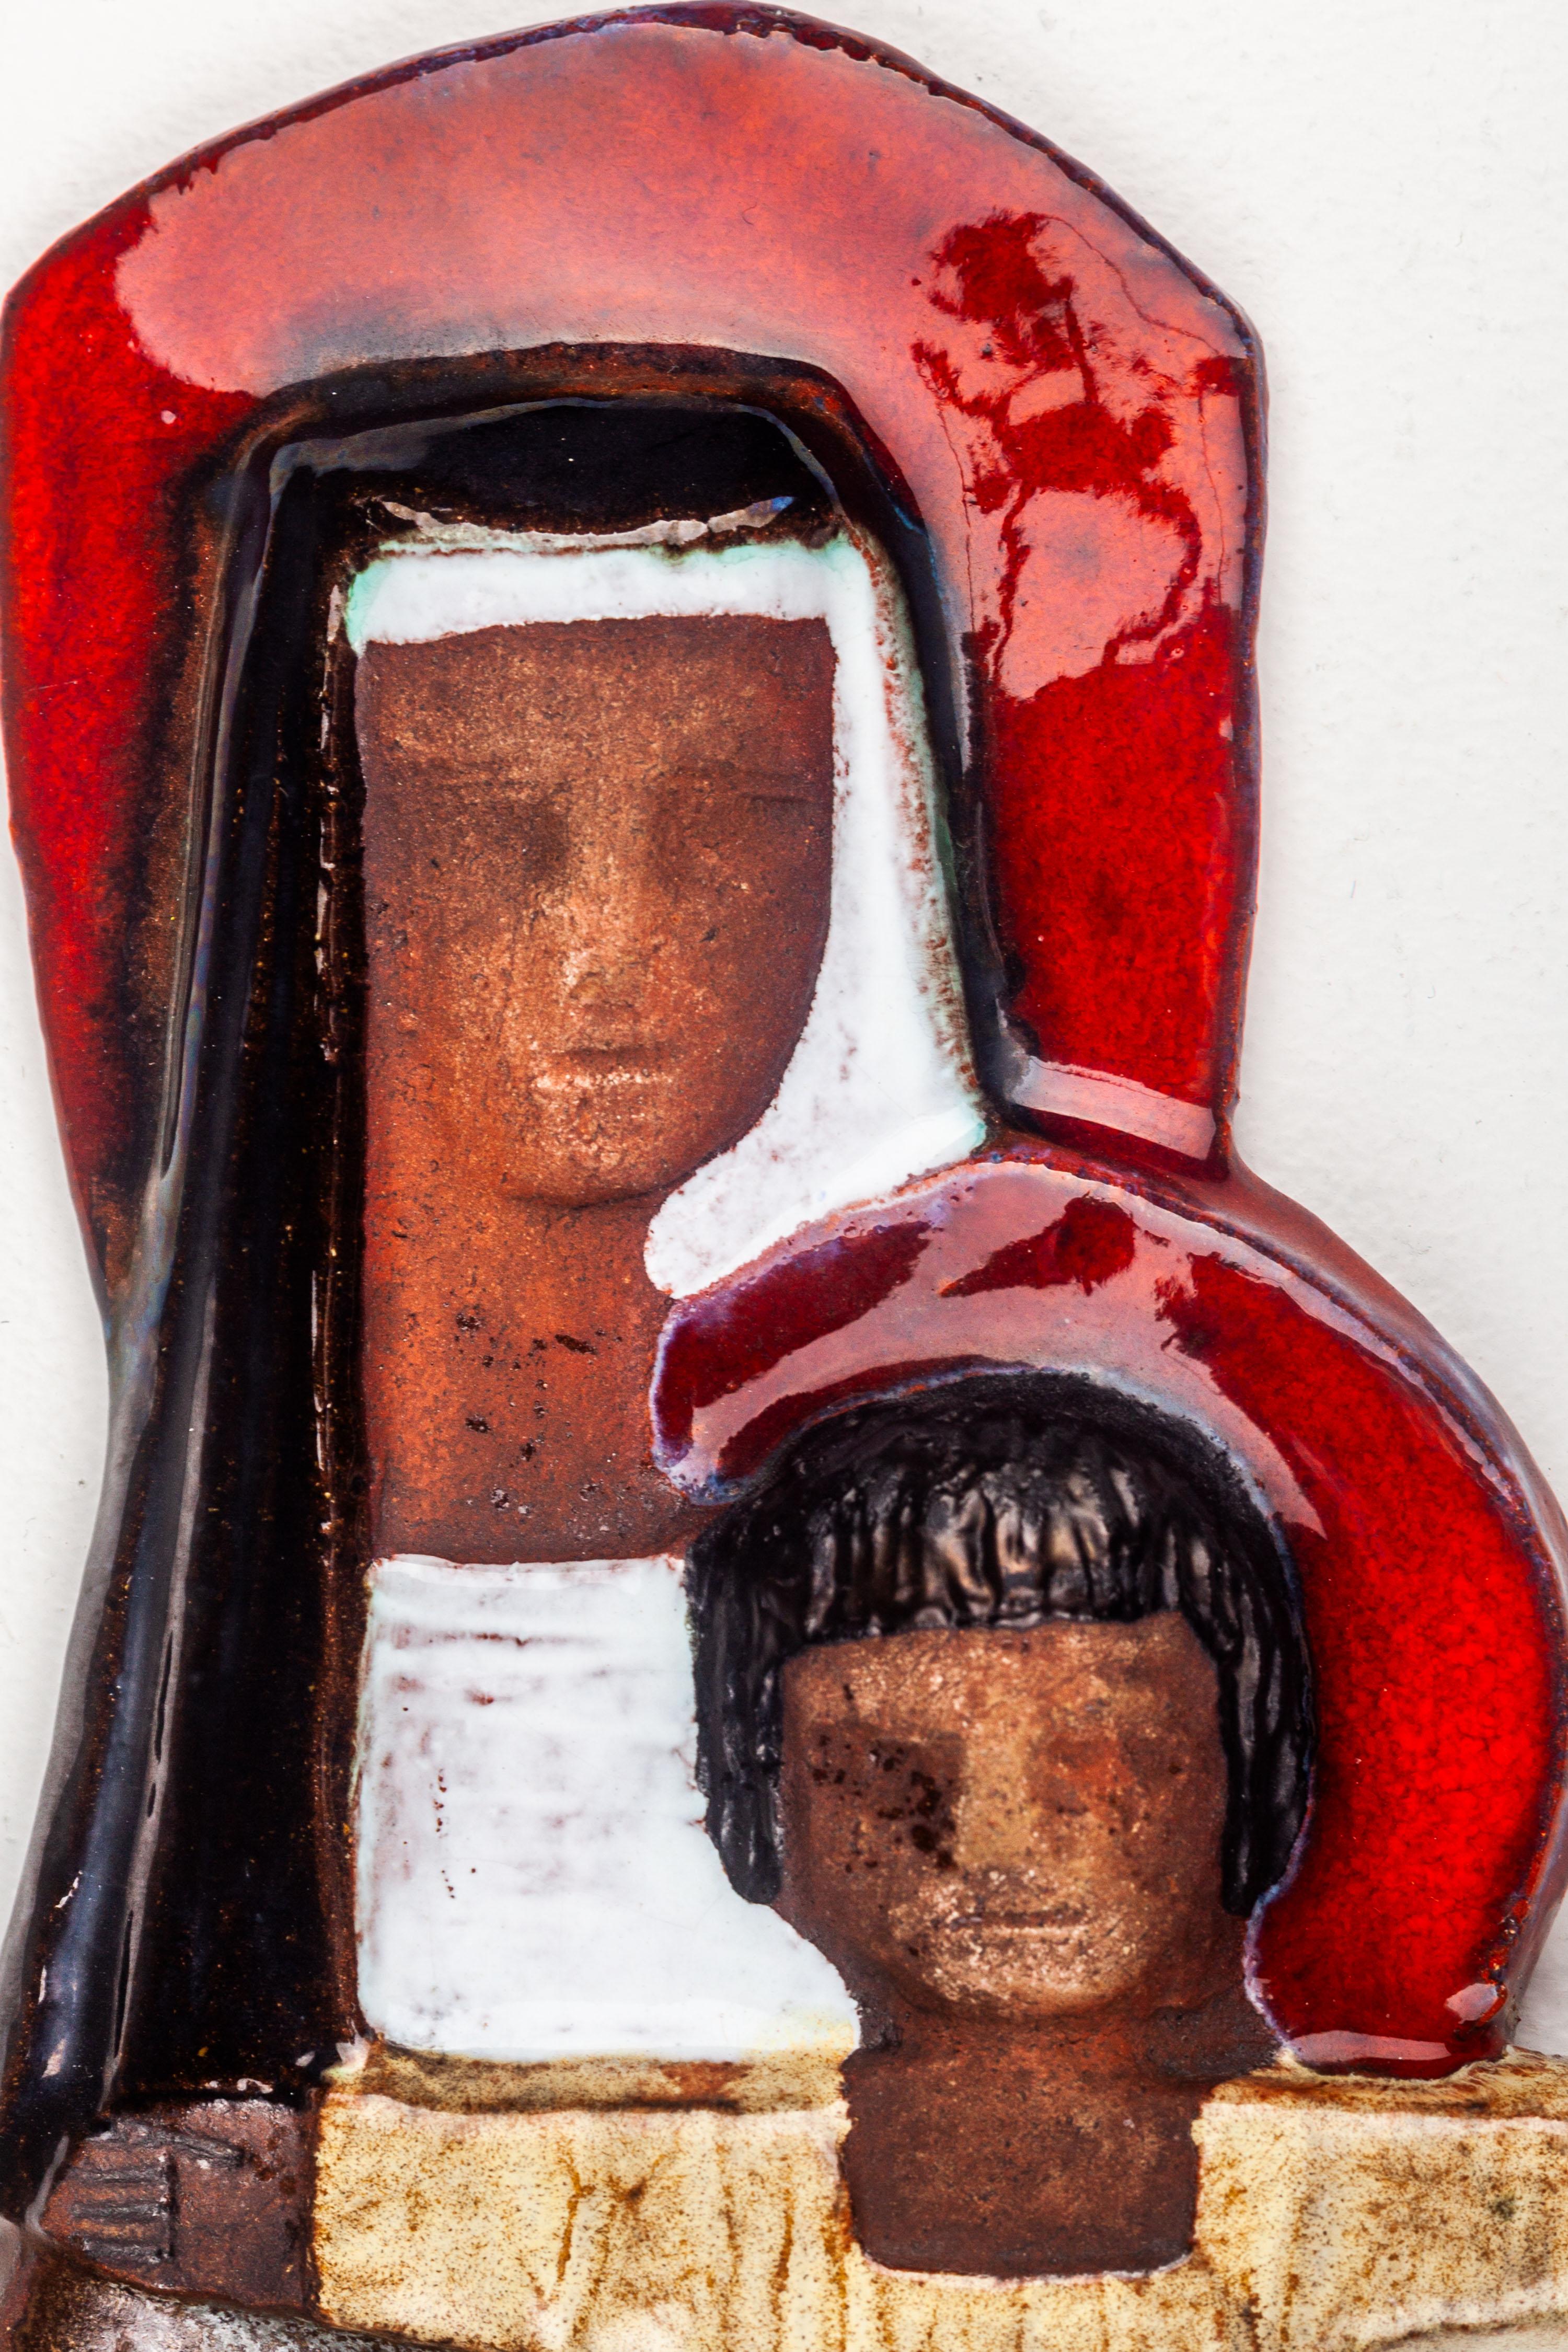 Modernist Virgin Mary and Child Jesus. Large 19-Inches Studio Pottery wall decoration. Interesting display of matte and glazed areas. Masterful color textures compositions on audacious modernist volumes. Tradition and modernity.

Our European cross